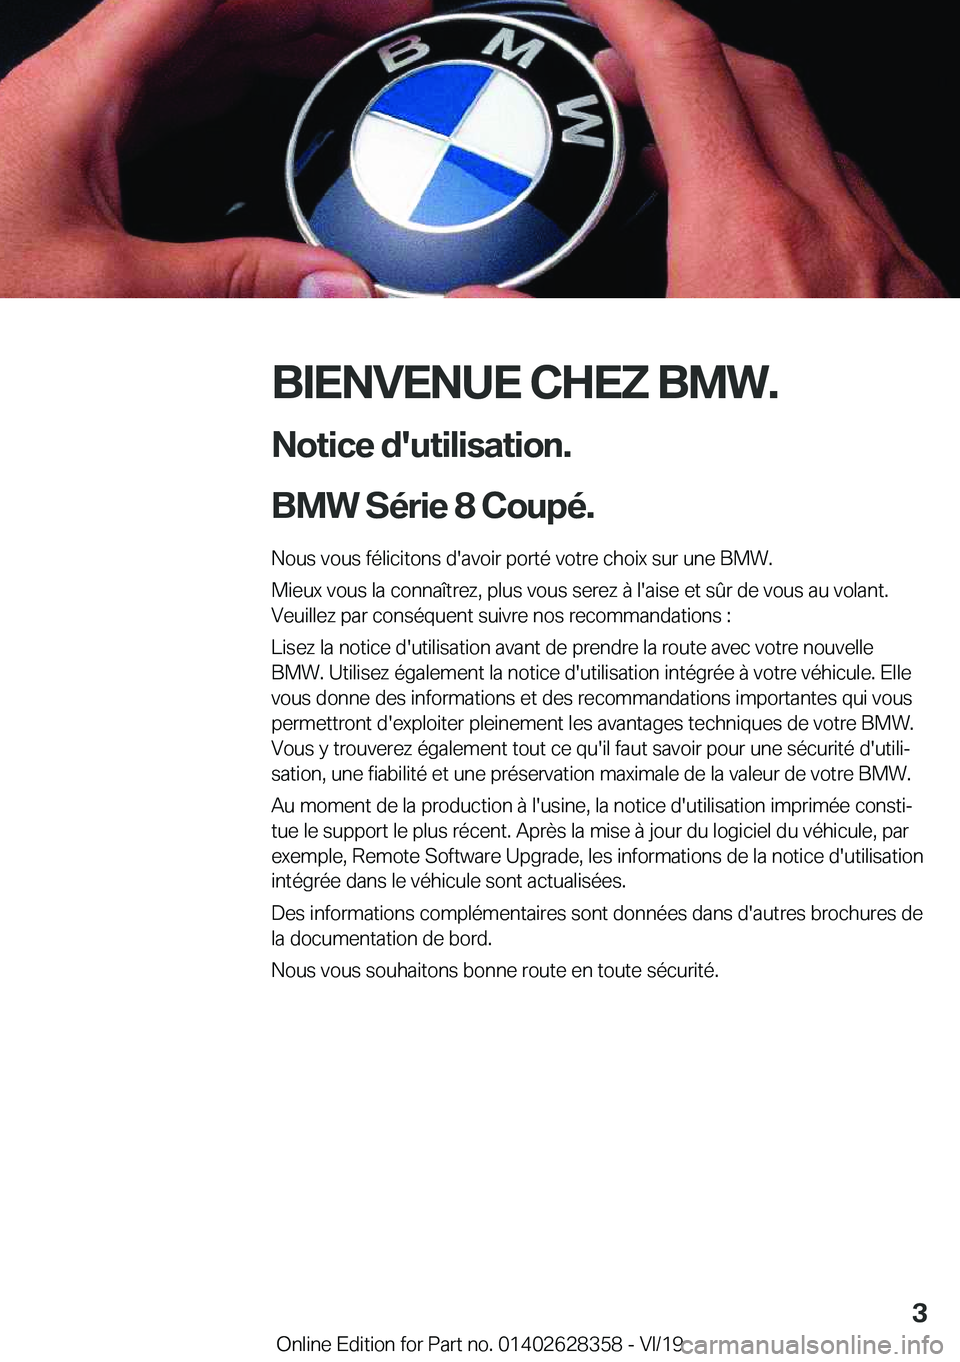 BMW 8 SERIES COUPE 2020  Notices Demploi (in French) �B�I�E�N�V�E�N�U�E��C�H�E�Z��B�M�W�.�N�o�t�i�c�e��d�'�u�t�i�l�i�s�a�t�i�o�n�.
�B�M�W��S�é�r�i�e��8��C�o�u�p�é�.
�N�o�u�s��v�o�u�s��f�é�l�i�c�i�t�o�n�s��d�'�a�v�o�i�r��p�o�r�t�é�